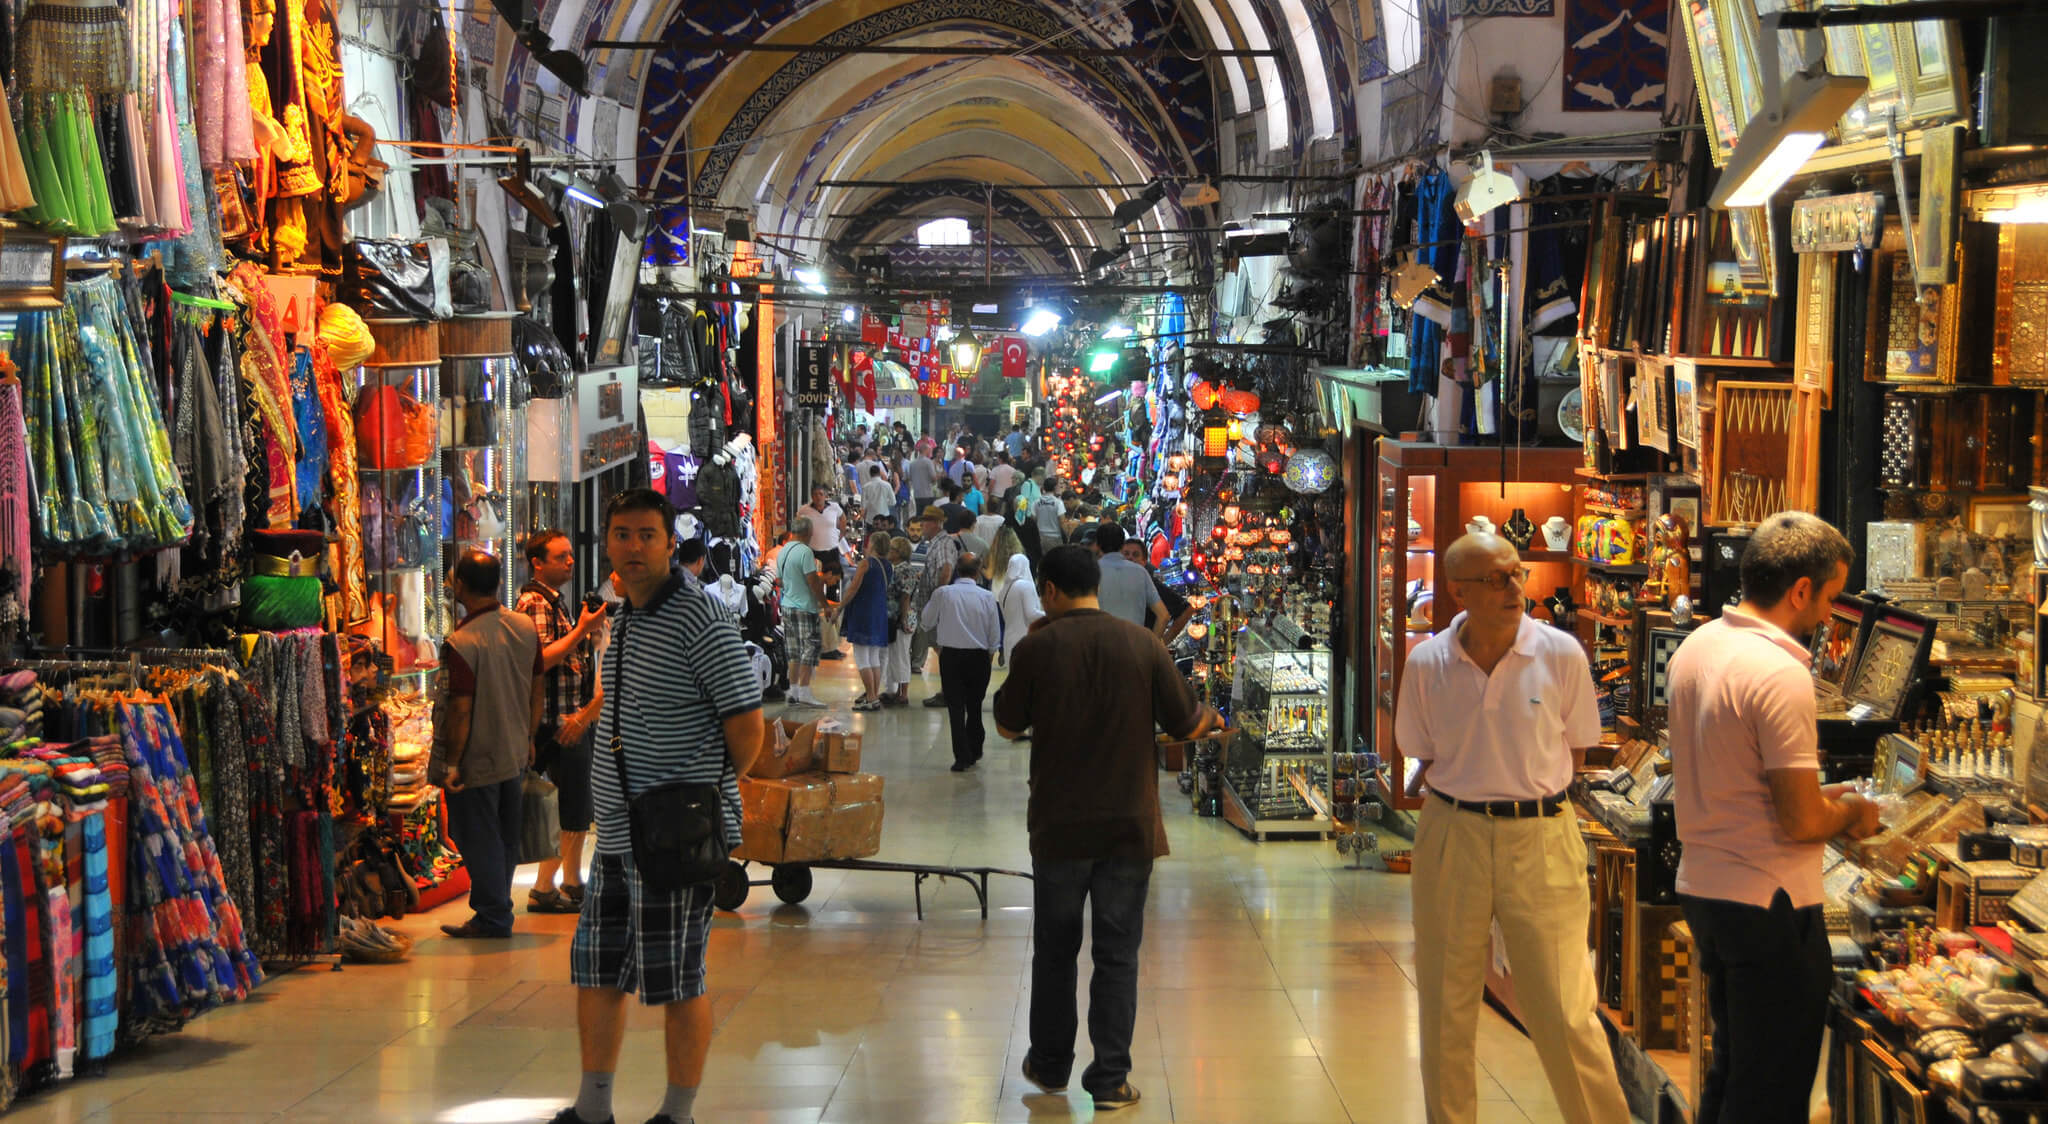 You could literally spend 4 days in Istanbul's Grand Bazaar and still not be able to fully explore it as it is the oldest and largest covered market in the world